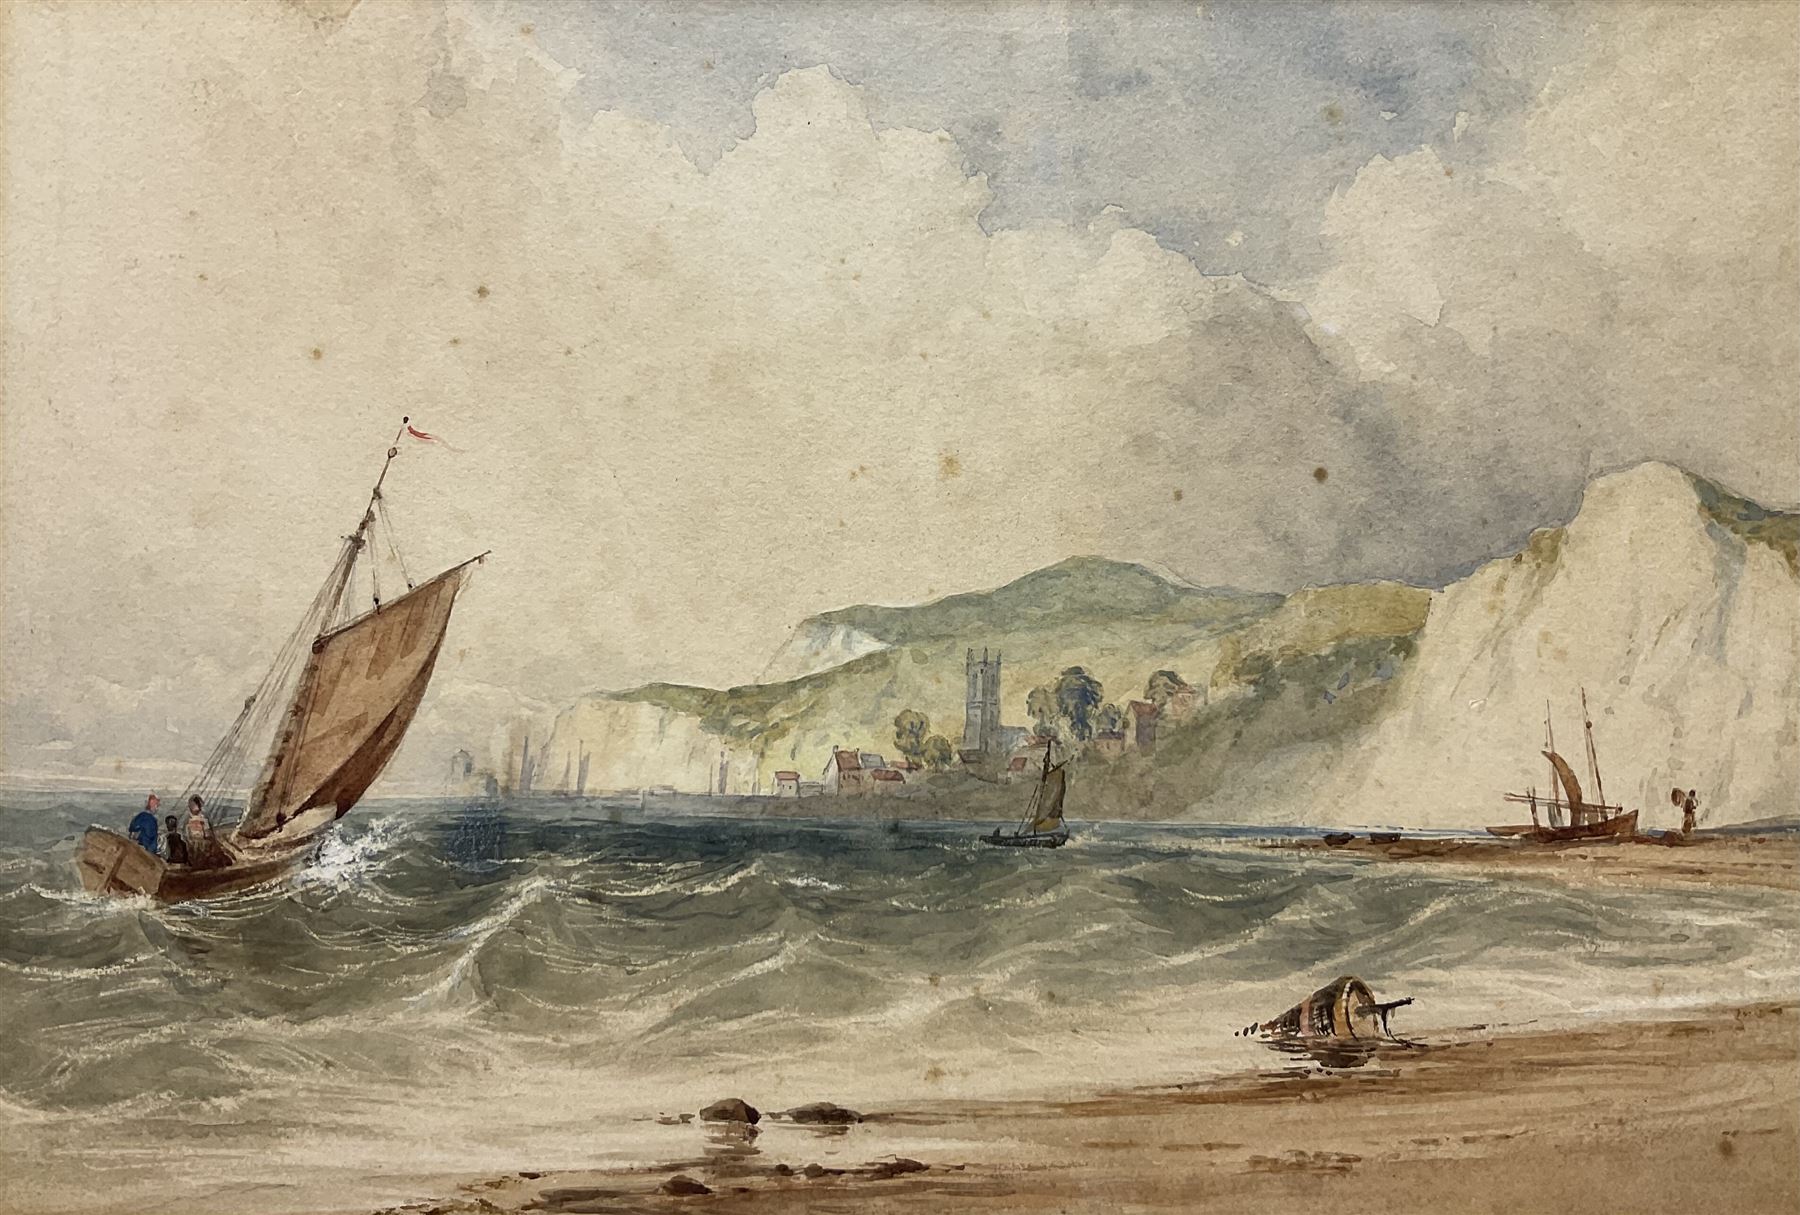 Anthony Vandyke Copley Fielding (British 1787-1855): 'Shipping off the South Coast'